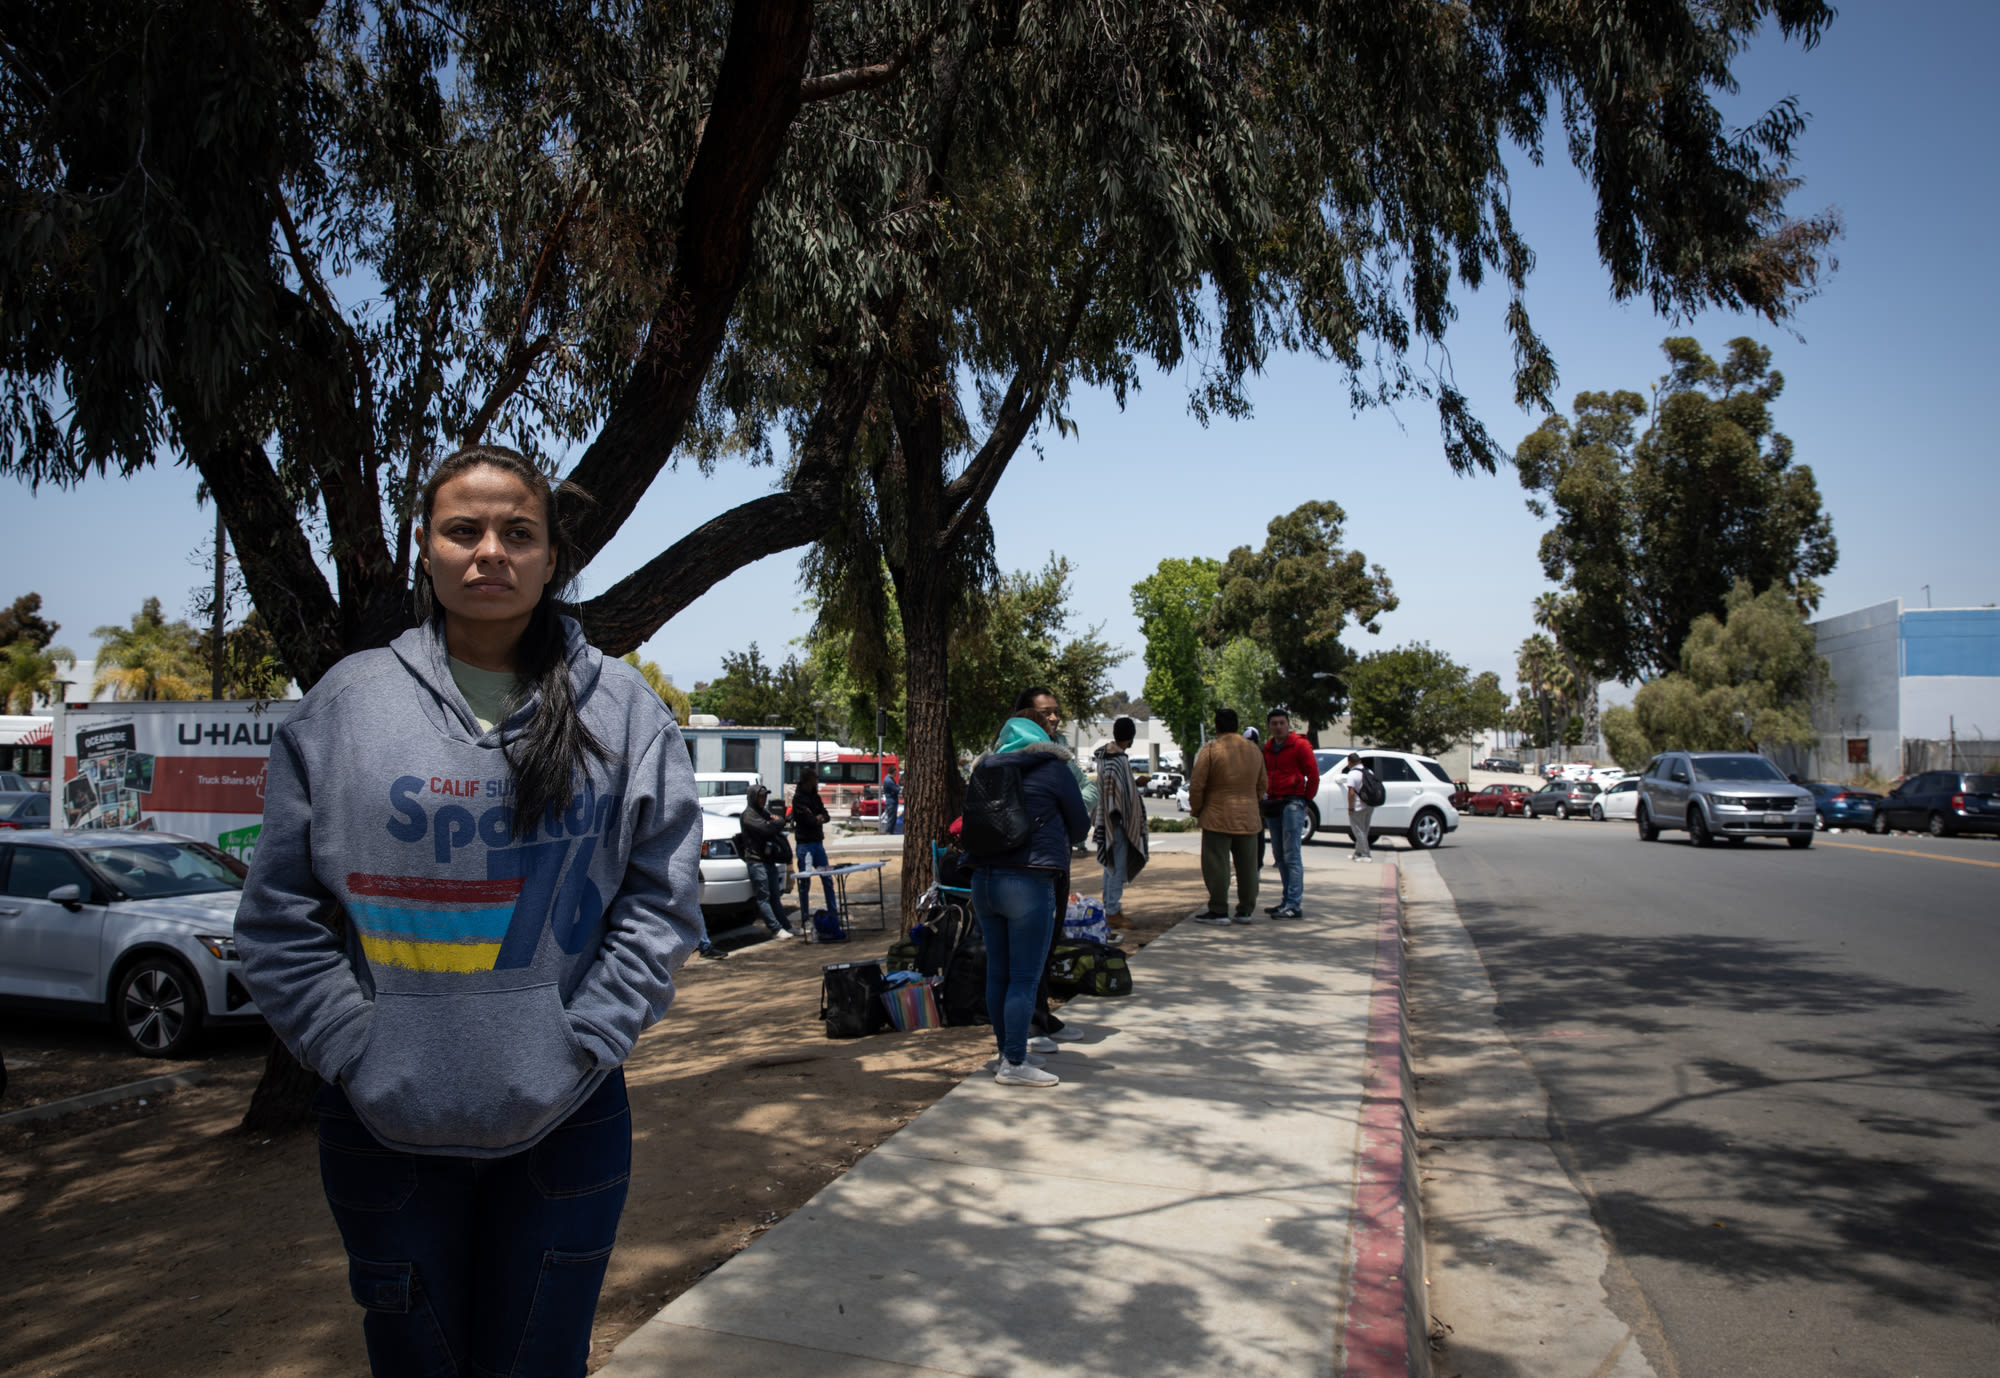 Shifting migrant routes make San Diego the new hotspot for illegal border crossings